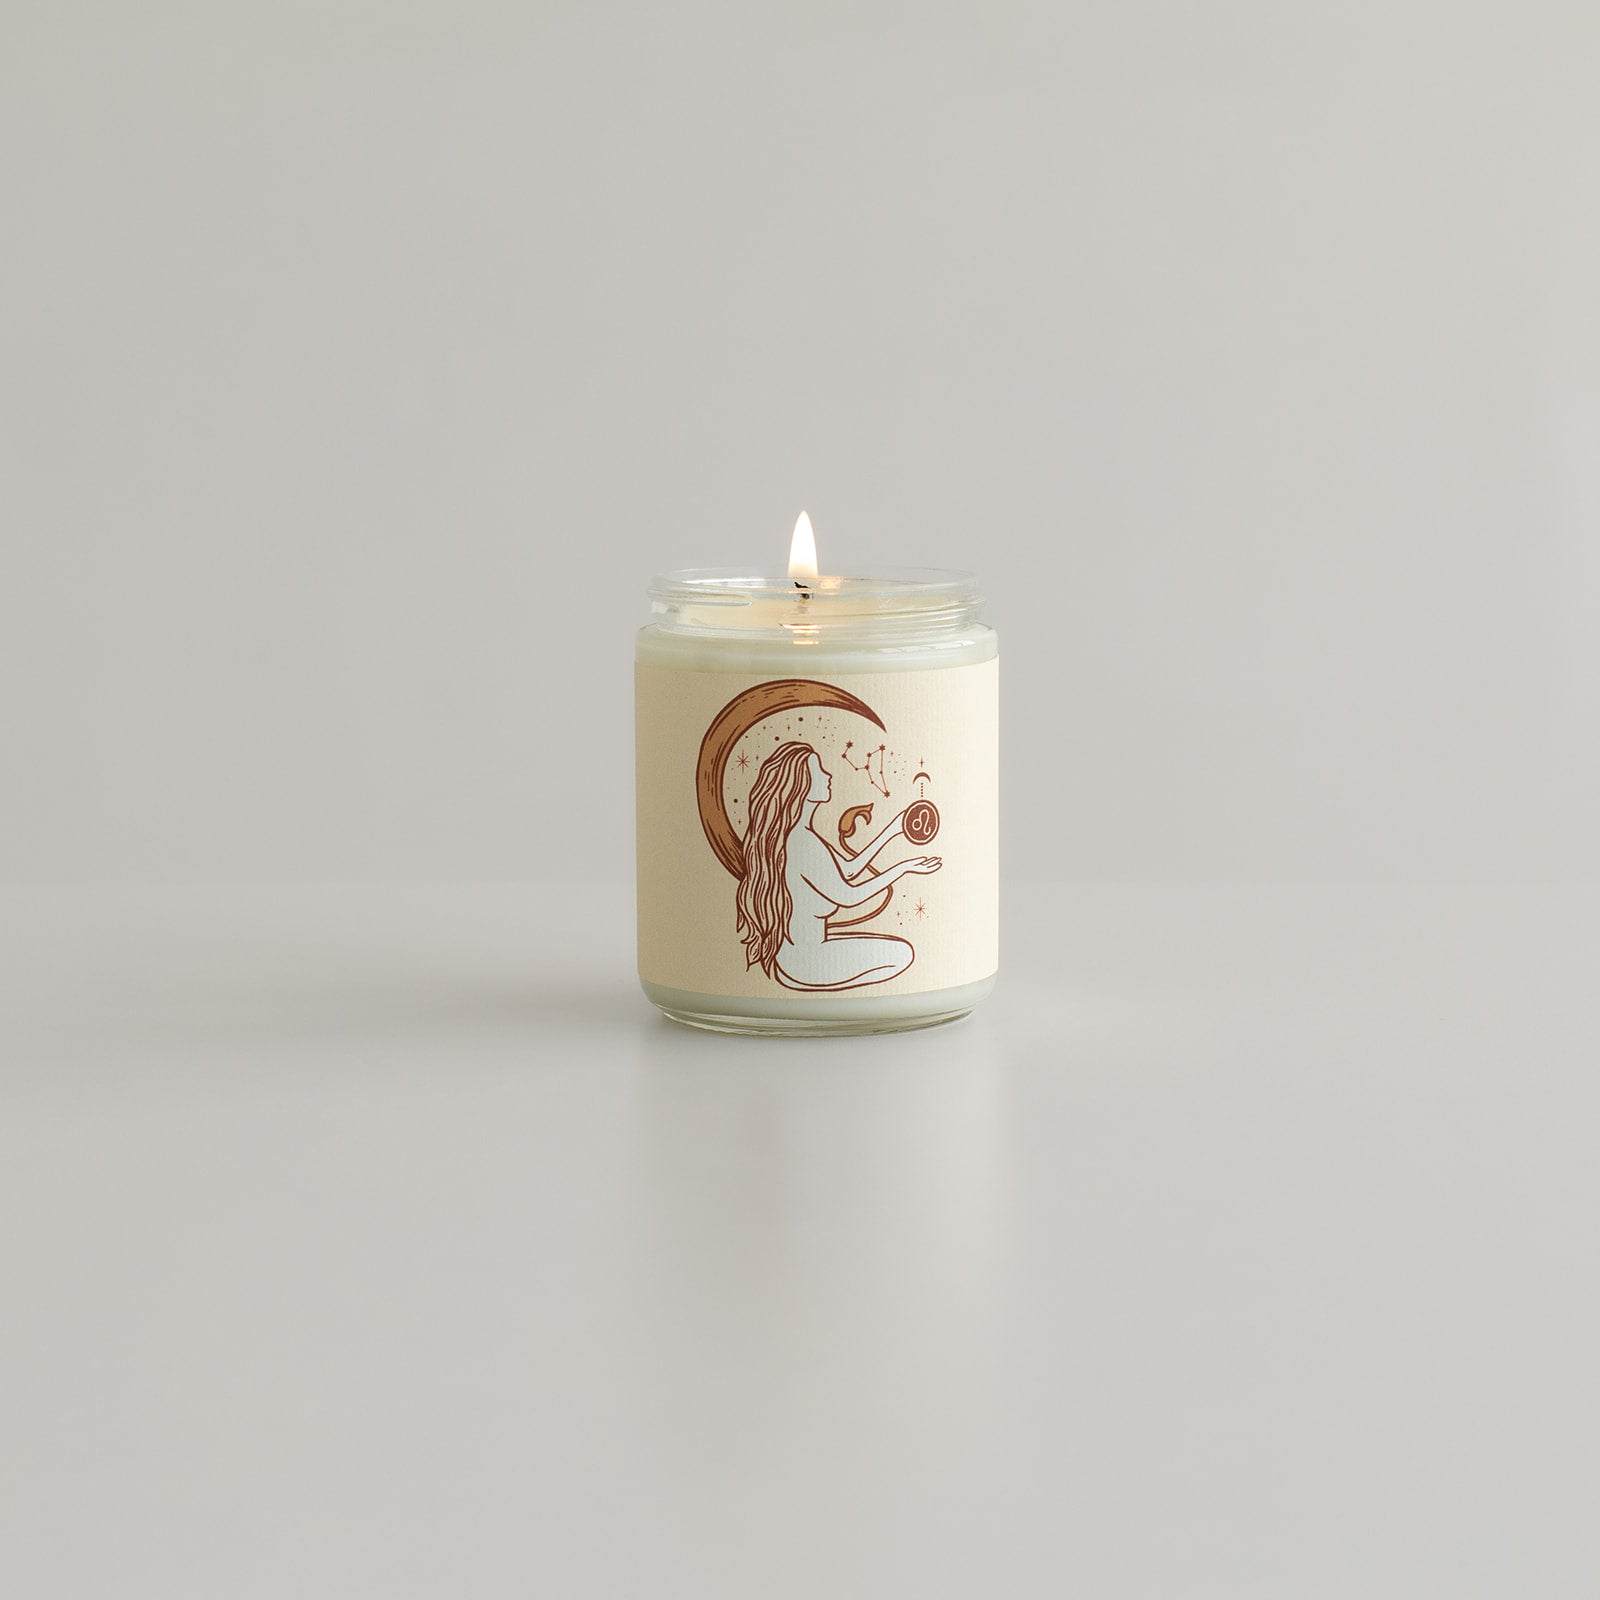 Leo seasons astrology candle for lion zodiac sign for horoscopes made from soy wax 